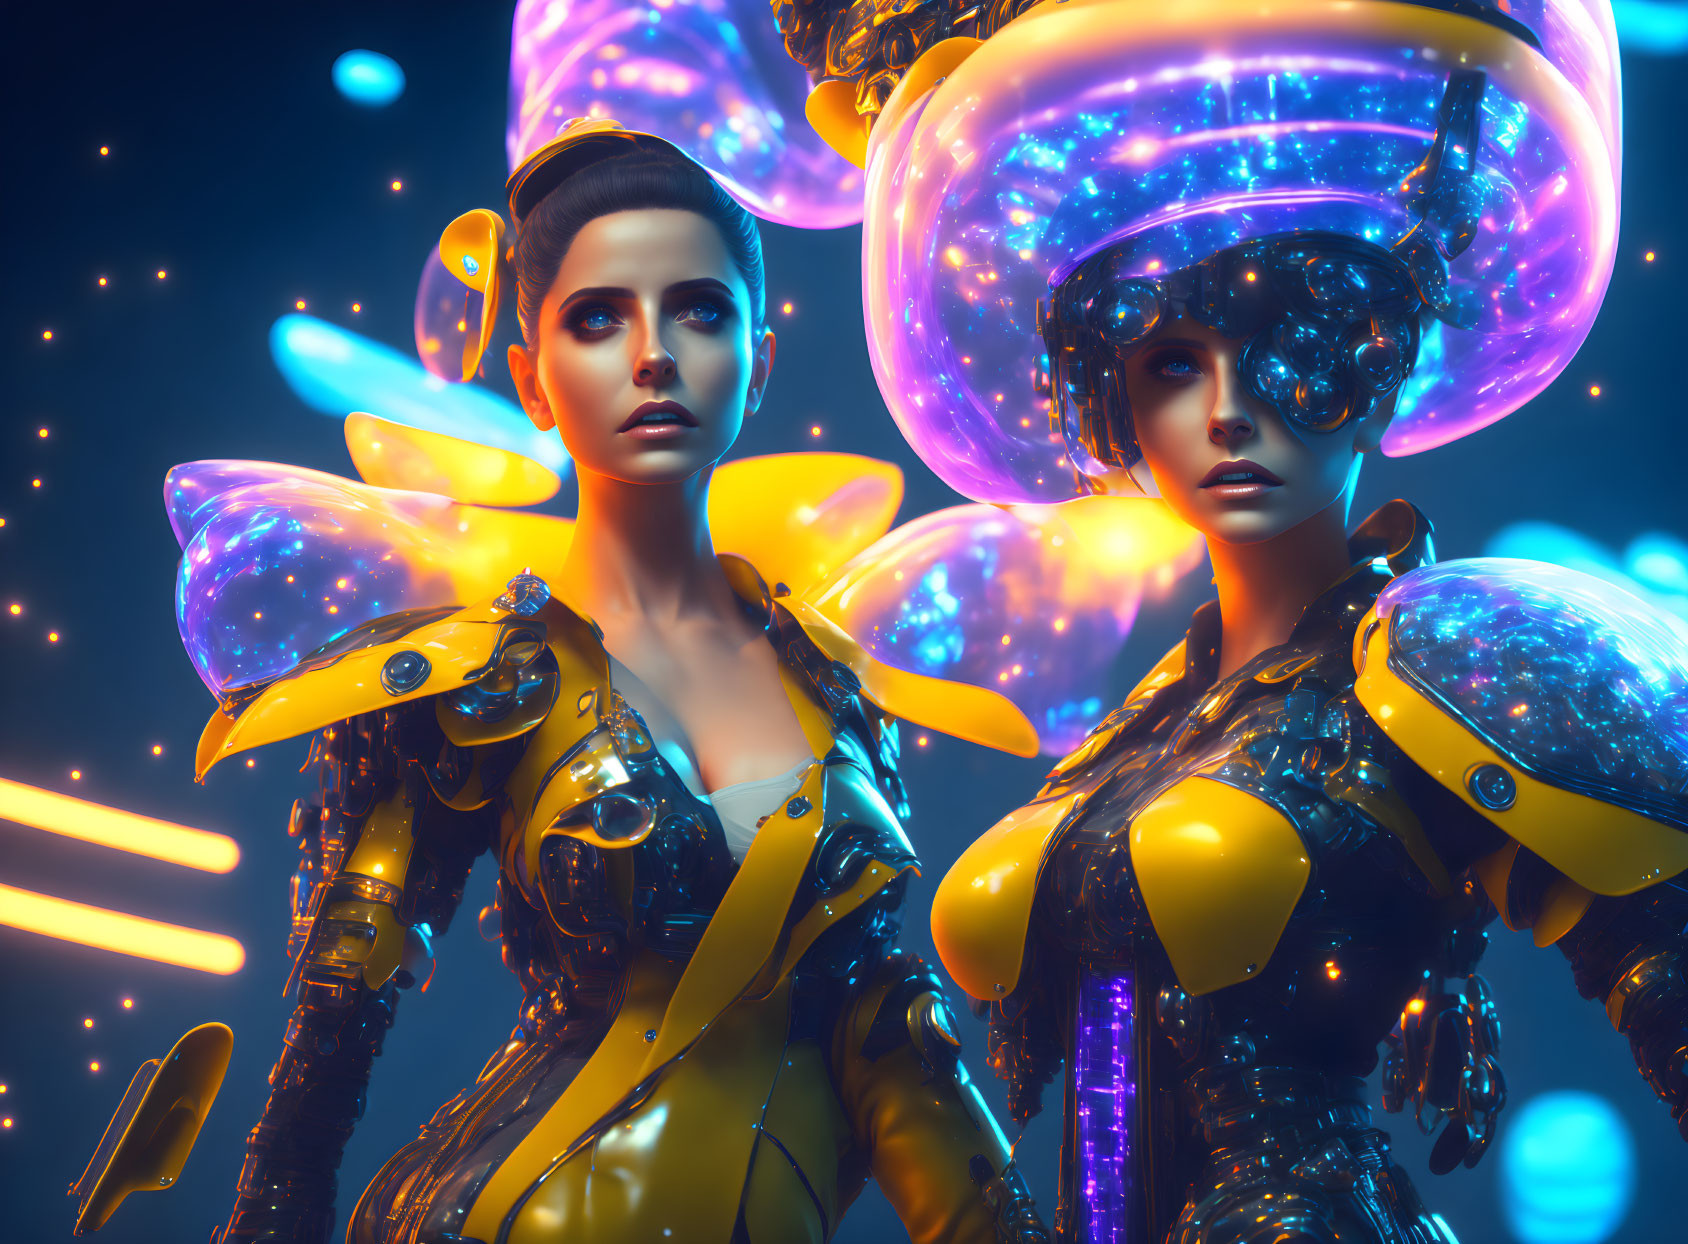 Futuristic women in space-themed headgear and armor against neon-lit backdrop